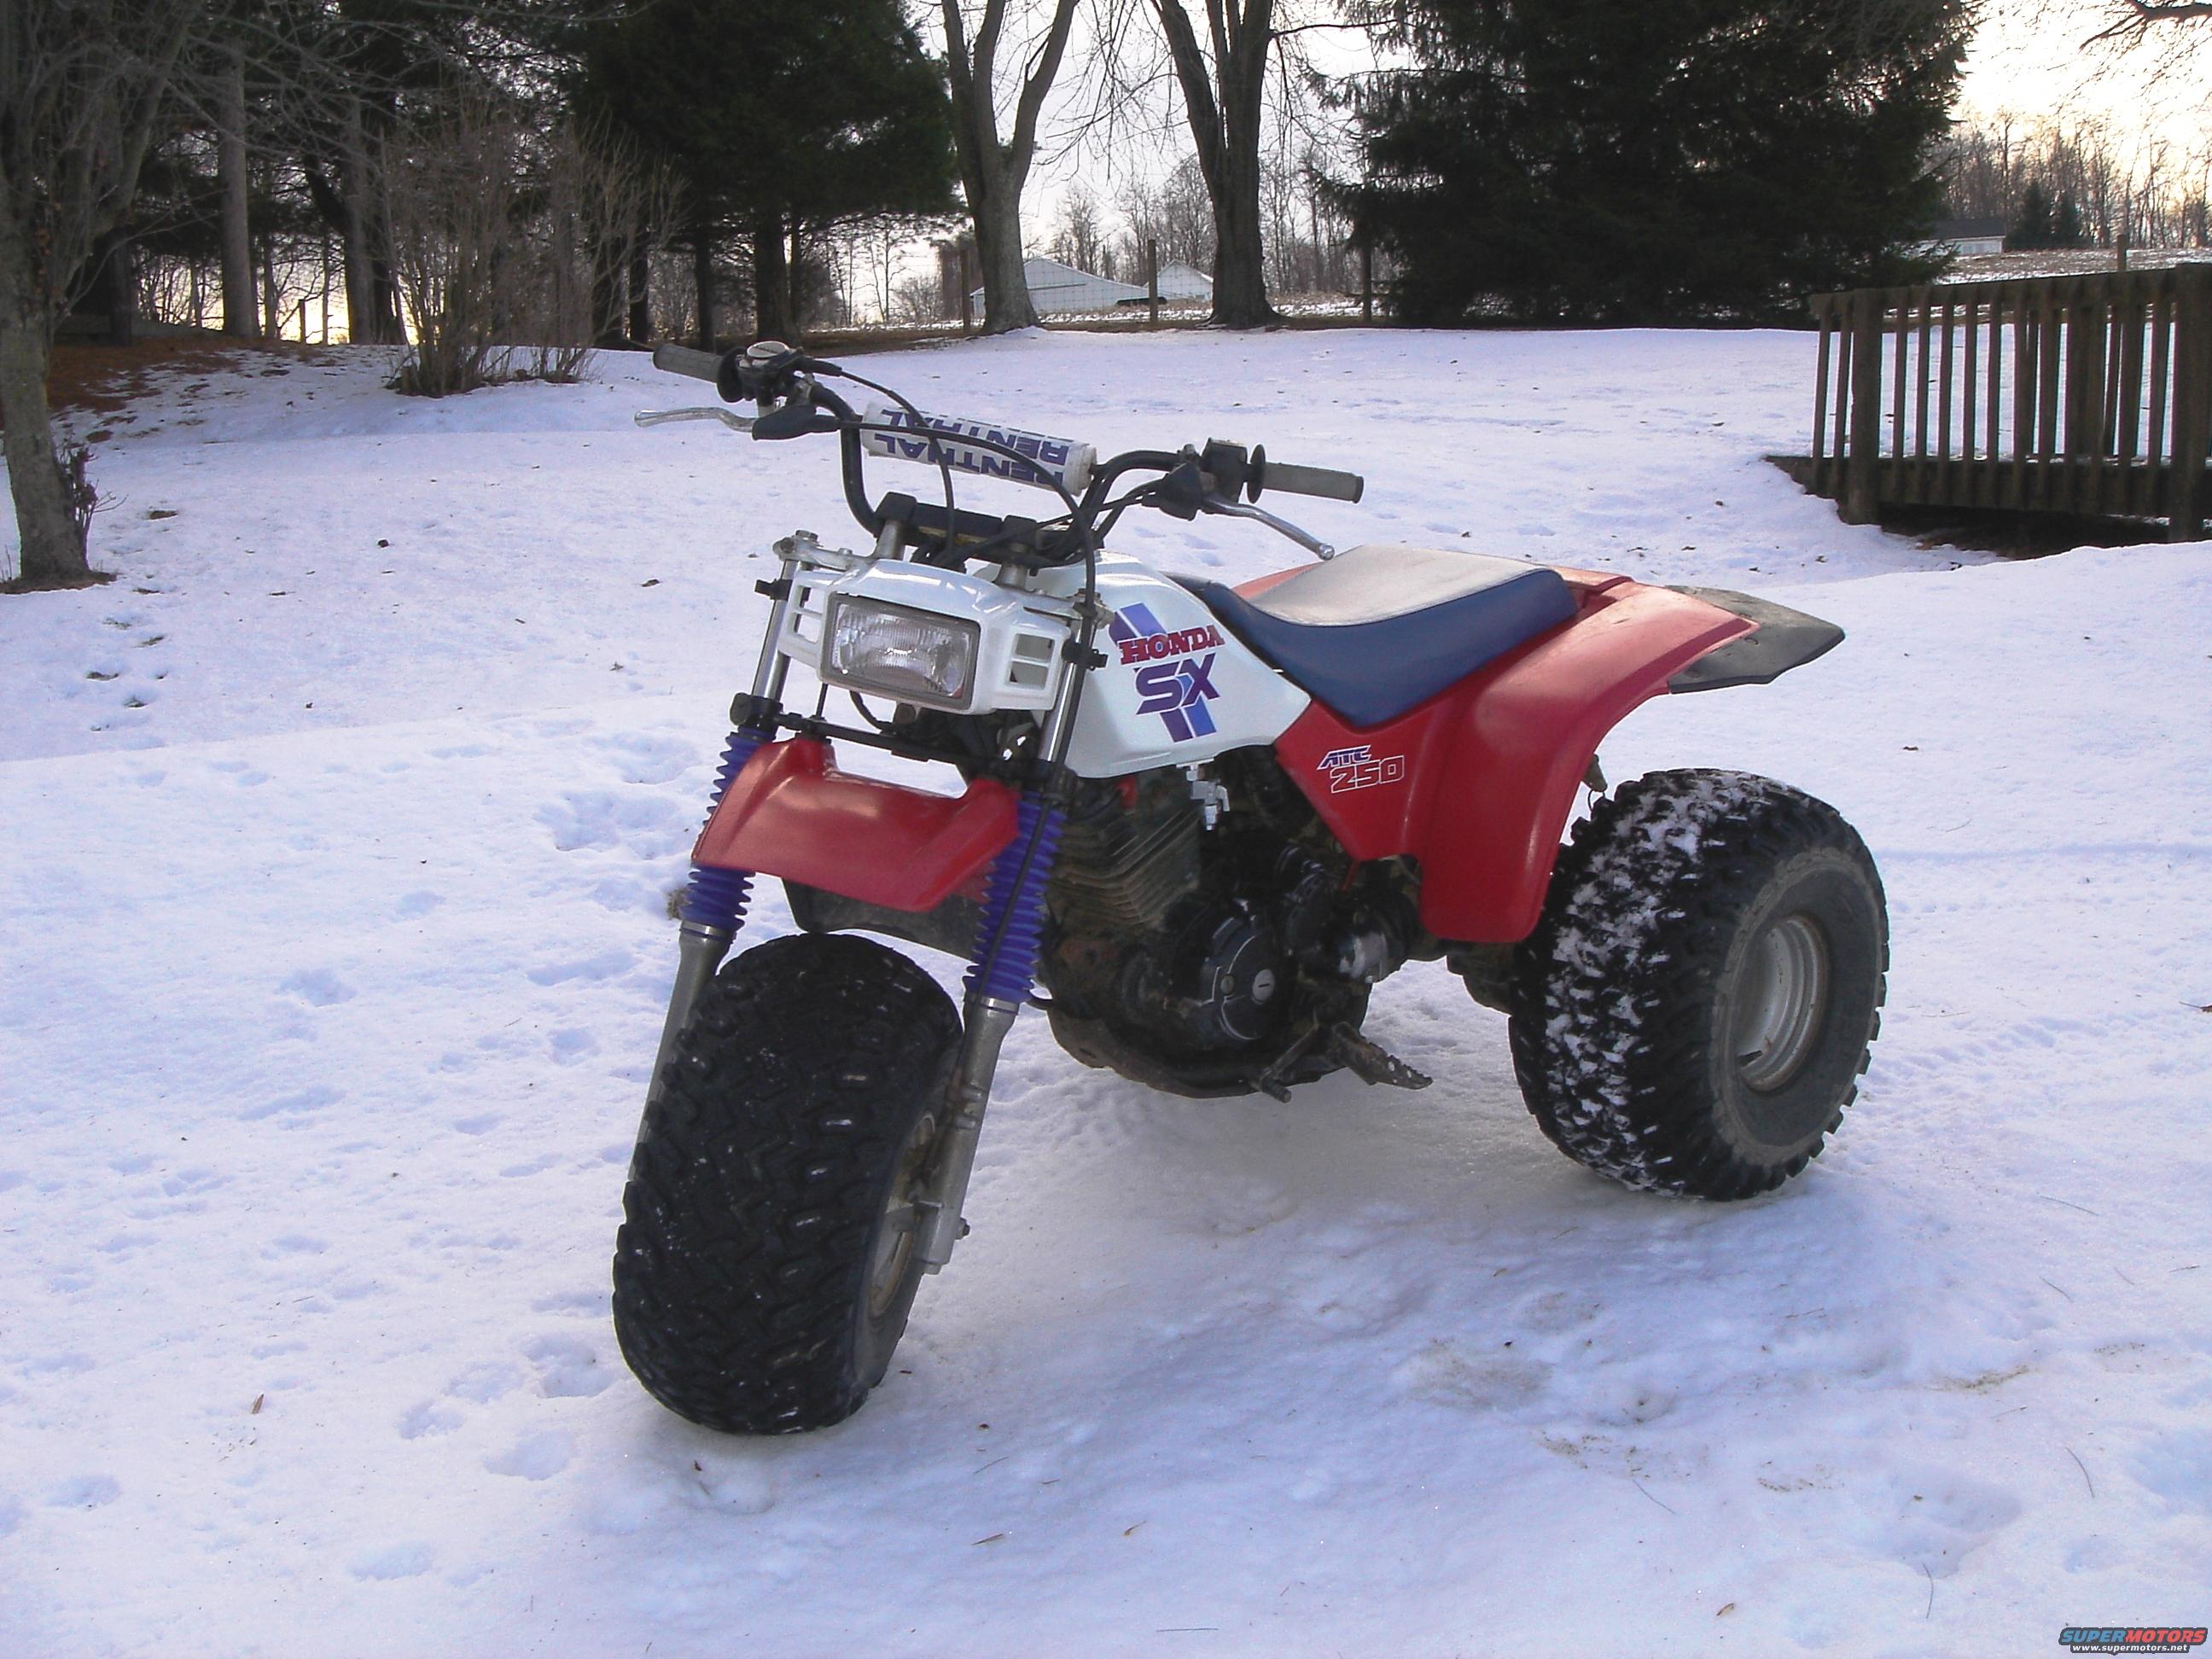 1985 Honda 250 X Pictures Photos Videos And Sounds